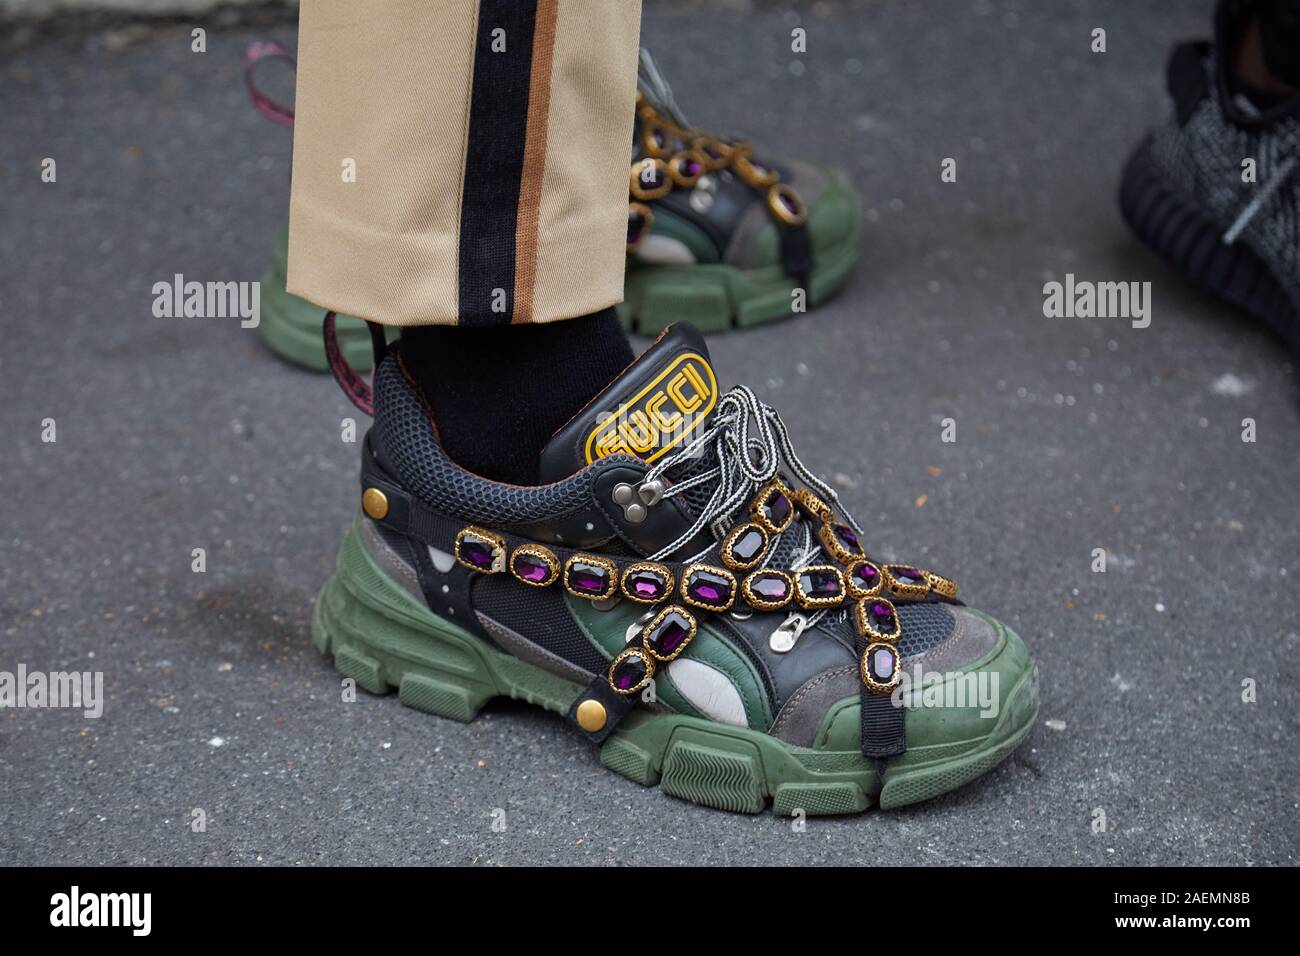 MILAN, ITALY - SEPTEMBER 2019: Man with green and black Gucci sneakers with purple gems decoration before Boss fashion show, Milan Fashion Week st Photo - Alamy